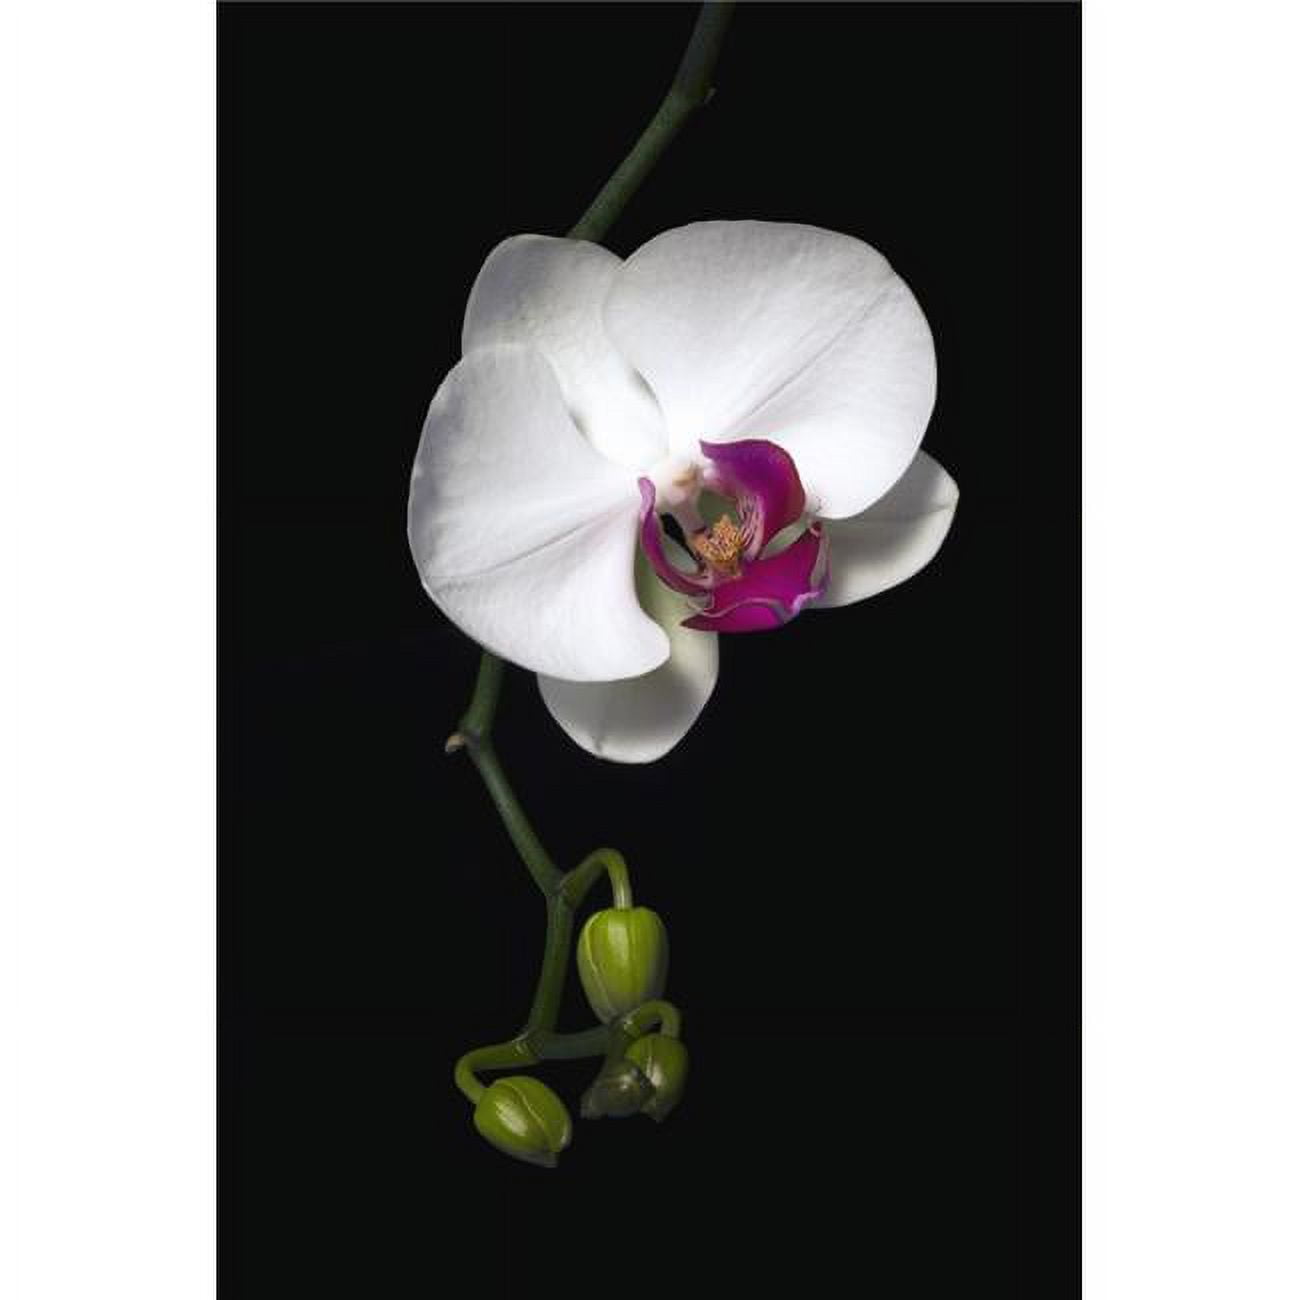 Chapman, x by Large - 36 Posterazzi 24 Print Orchid DPI1831101LARGE Poster David